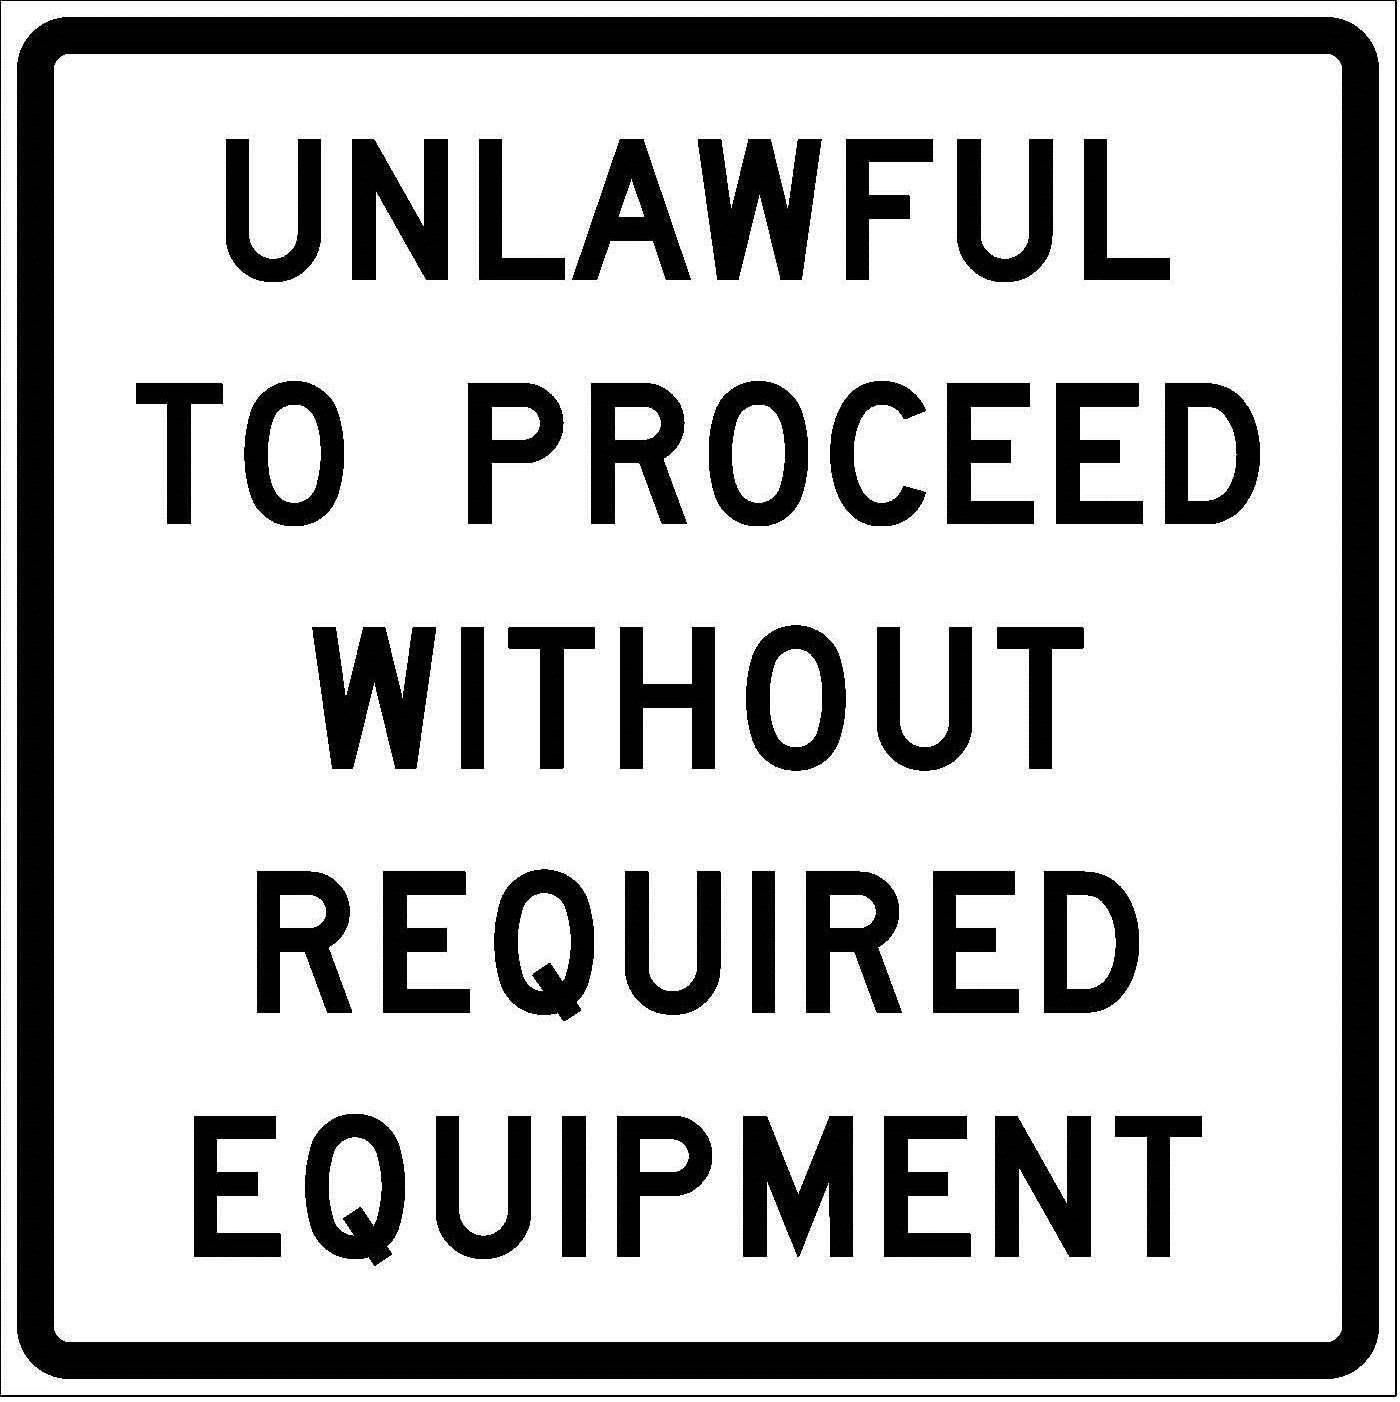 R52-10c Unlawful To Proceed Without Required Equipment JPEG detail image